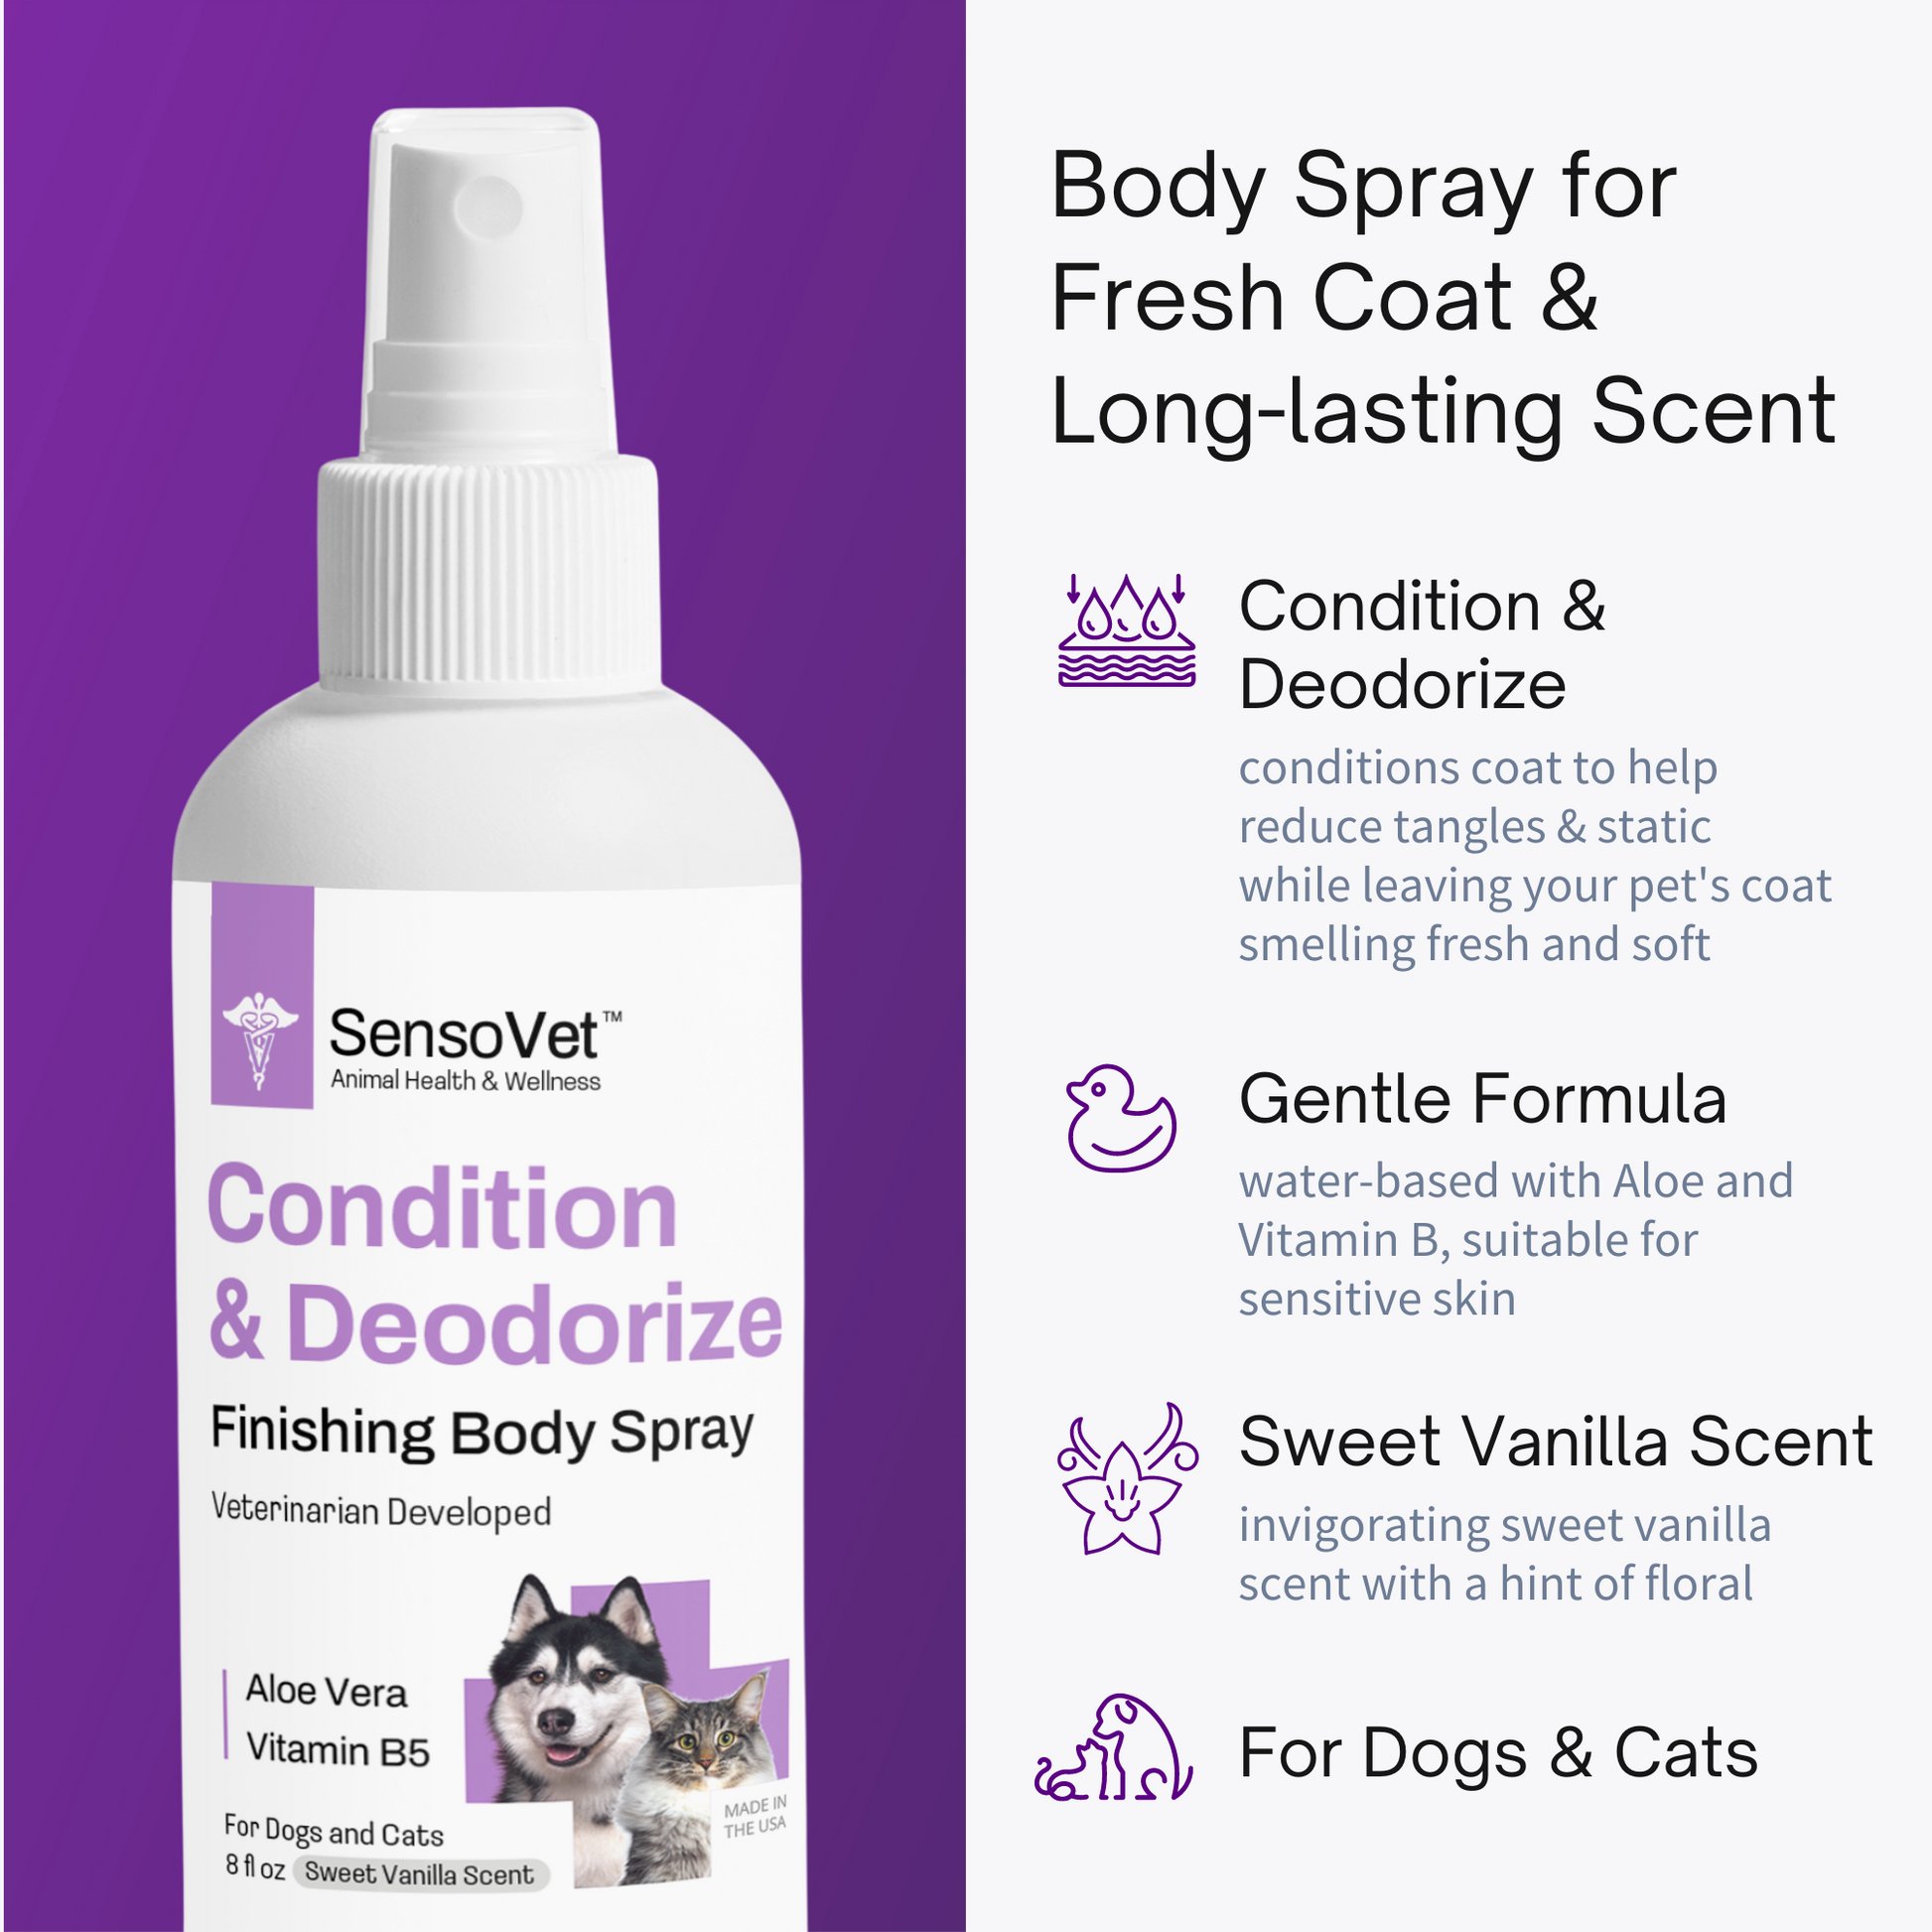 Condition & Deodorize coat to help reduce tangles and static while leaving your dog or cat's coat smelling fresh and soft